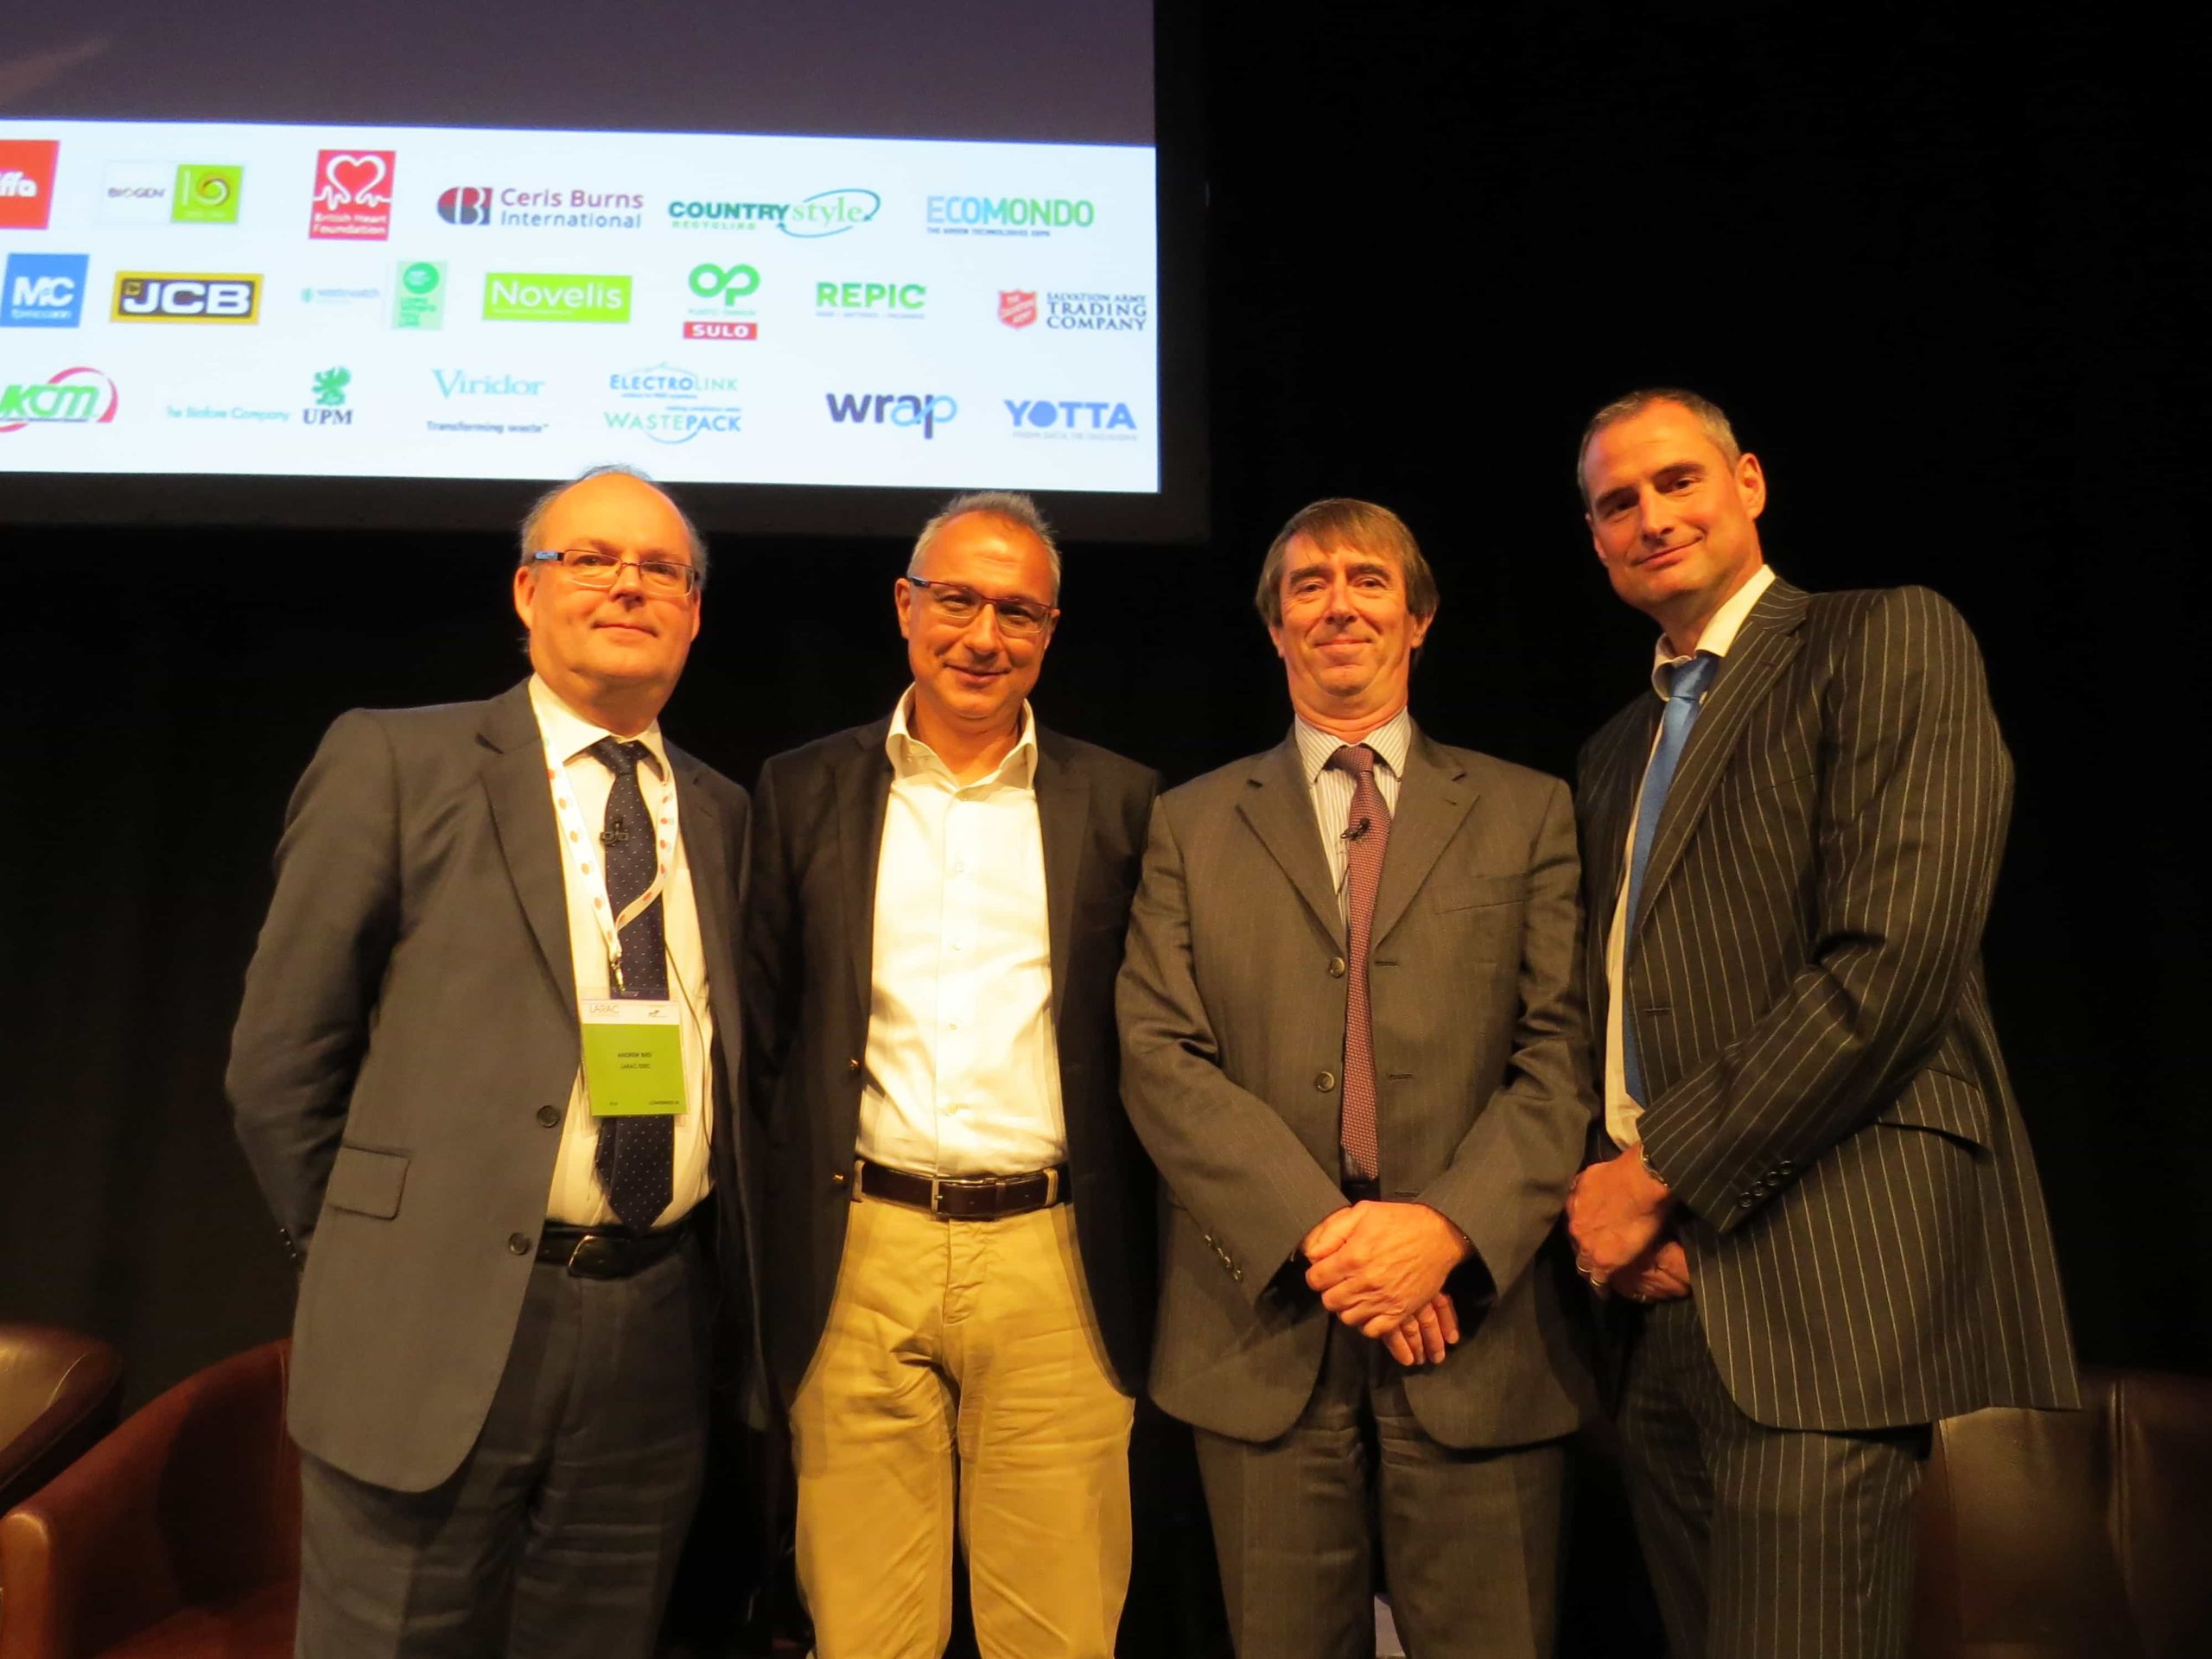 Phil Conran explained how local authorities were benefiting from the PRN system - pictured here at the LARAC conference are: LARAC chair and ACP member Andrew Bird; keynote speaker Antonis Mavropoulos; Phil Conran, ACP chair; and speaker Stuart Hayward-Higham of Suez